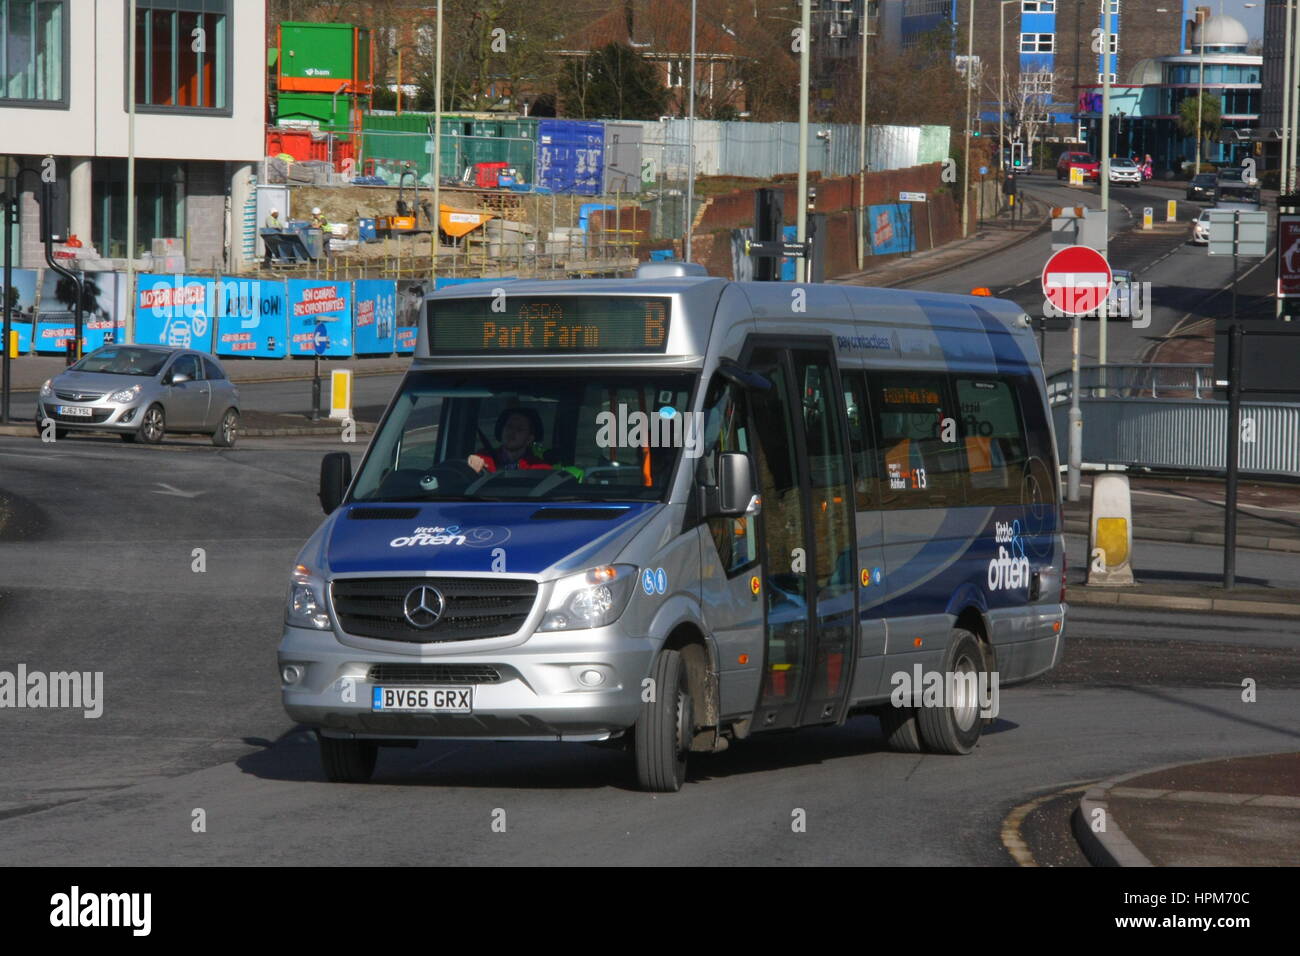 STAGECOACH SOUTH EAST NEW LITTLE & OFTEN MERCEDES BENZ SPRINTER CITY 45 MINIBUS Stock Photo